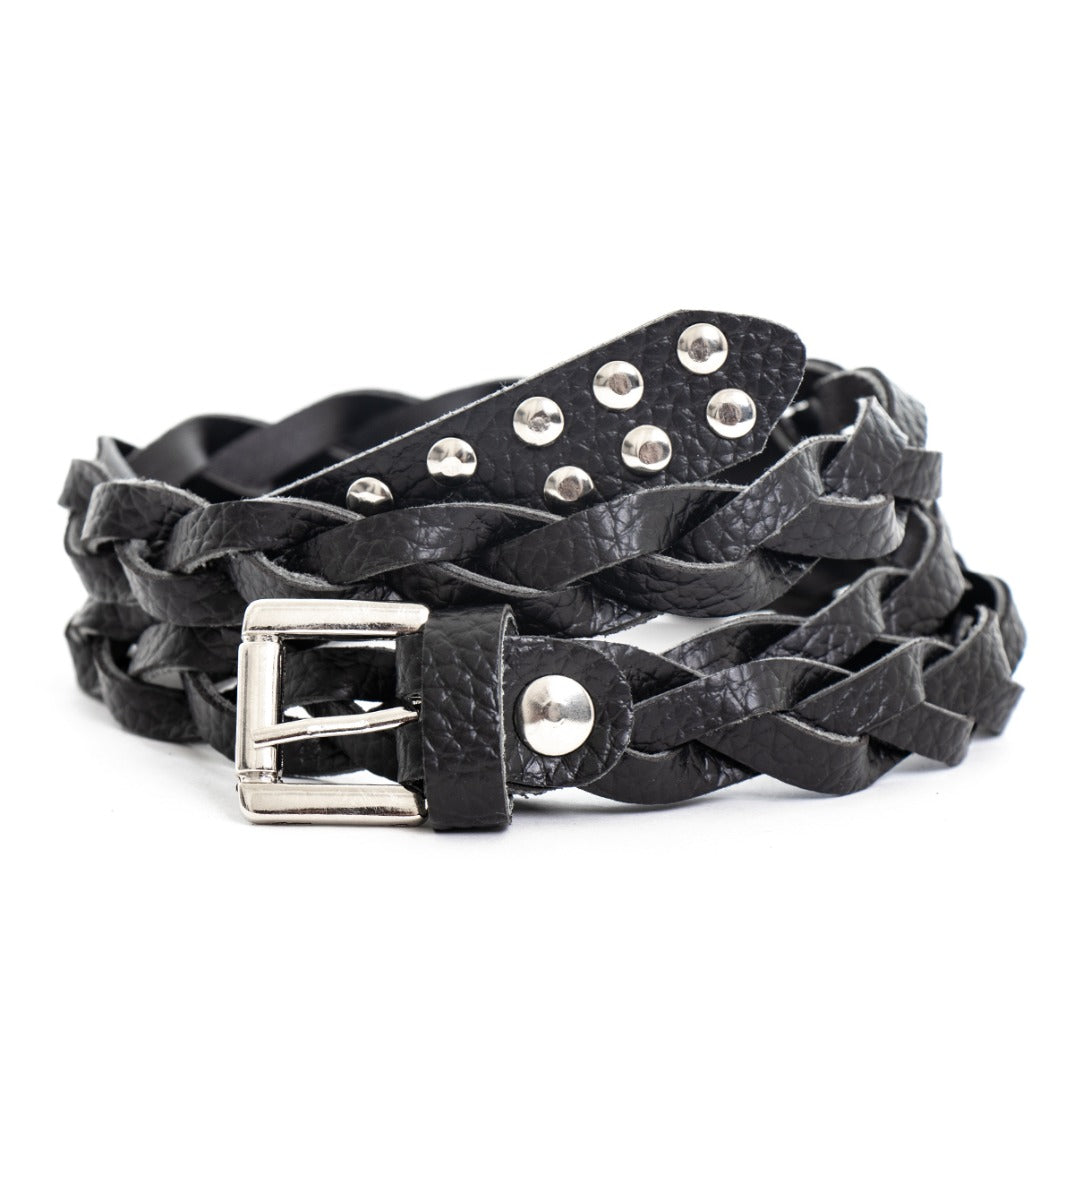 Men's Belt With Studs Woven Belt Adjustable Metal Buckle Black Faux Leather GIOSAL-A2051A